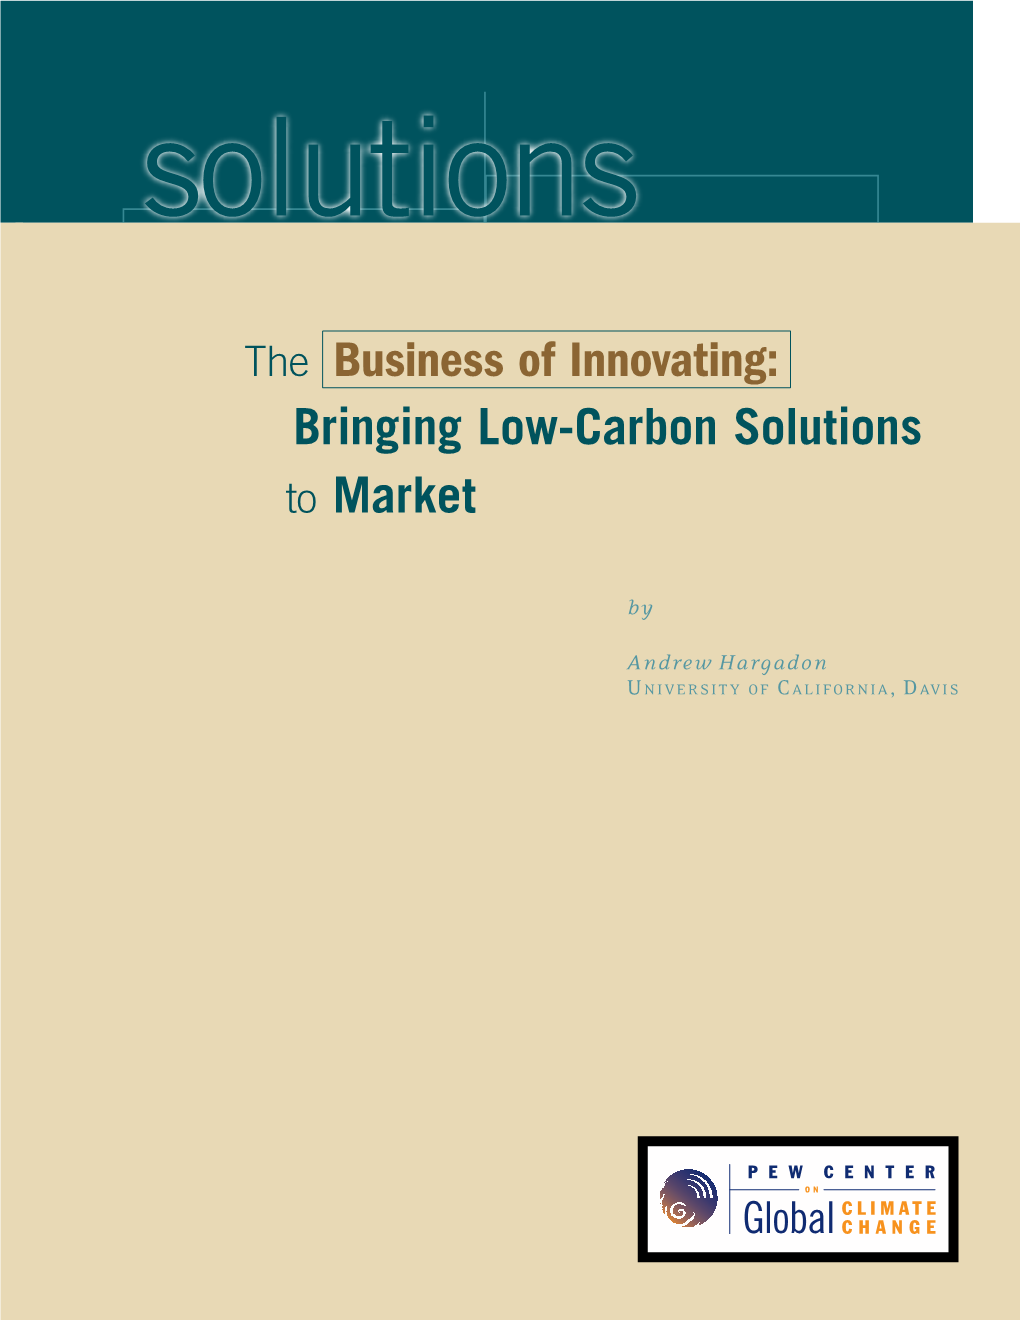 Bringing Low-Carbon Solutions to Market